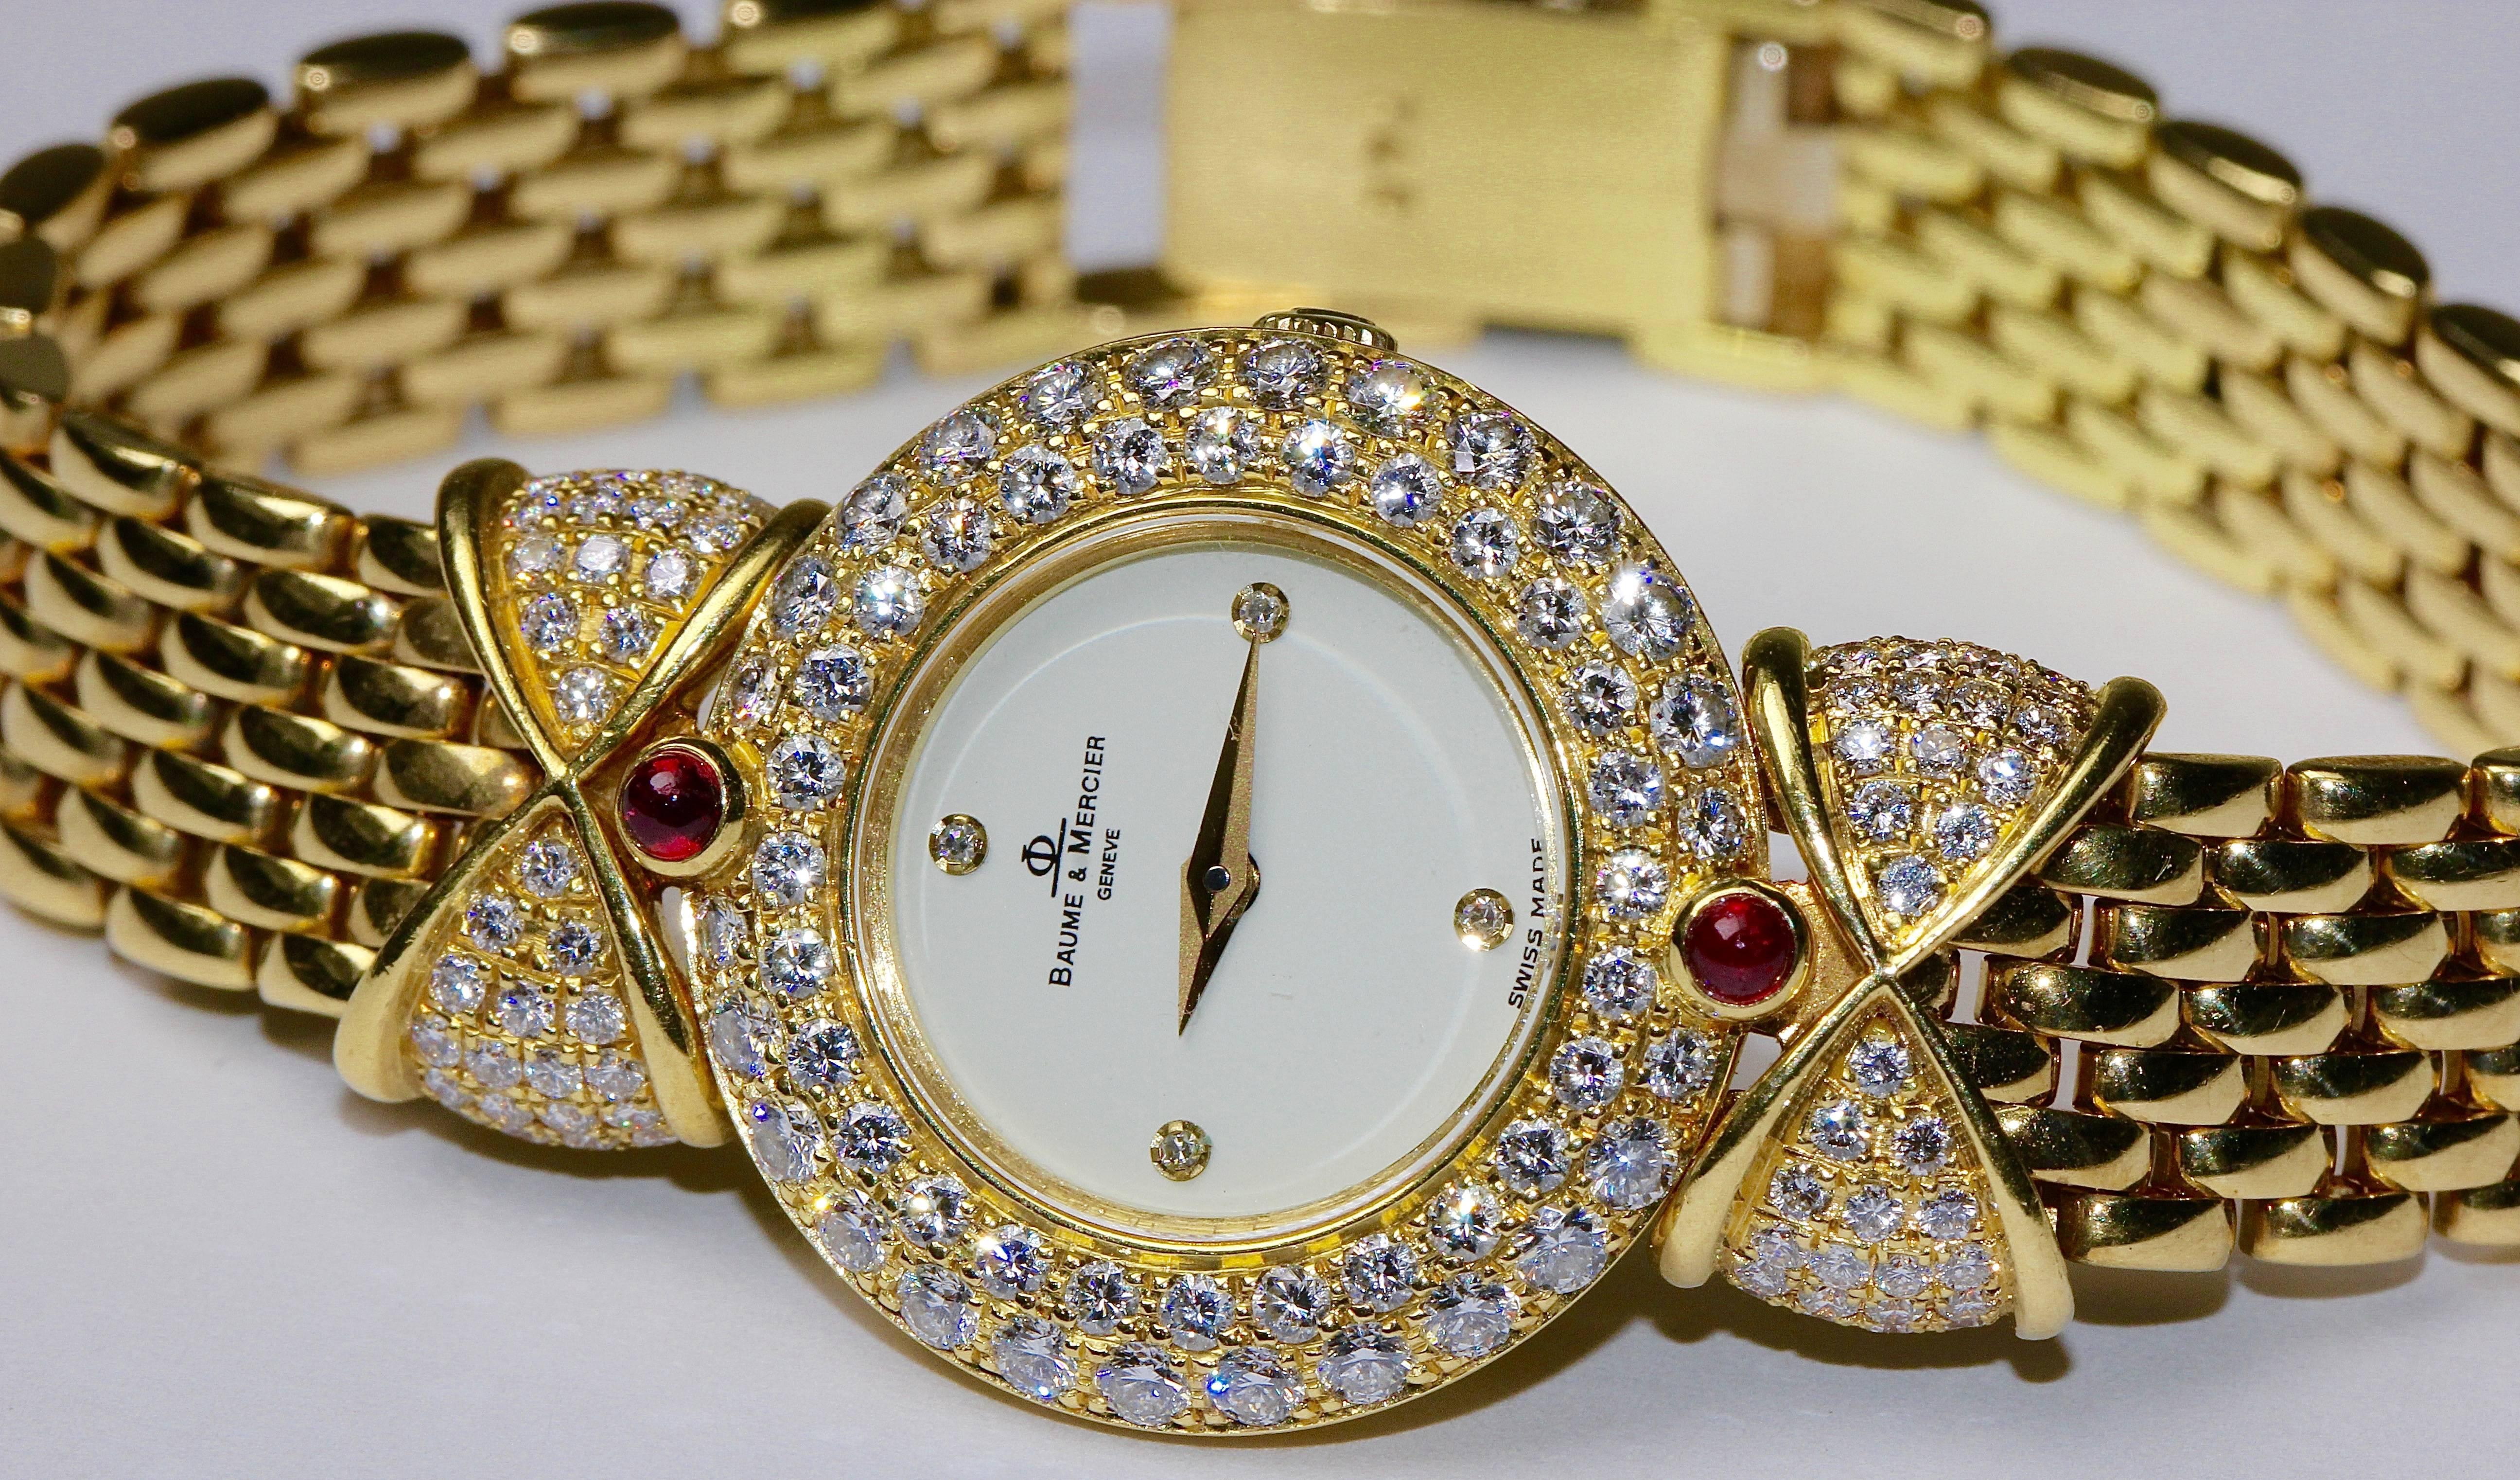 Beautiful and very fine ladies watch from Baume & Mercier. Completely made of 18k gold. Studded with countless diamonds and two top quality rubies.

Total length about 166 mm.